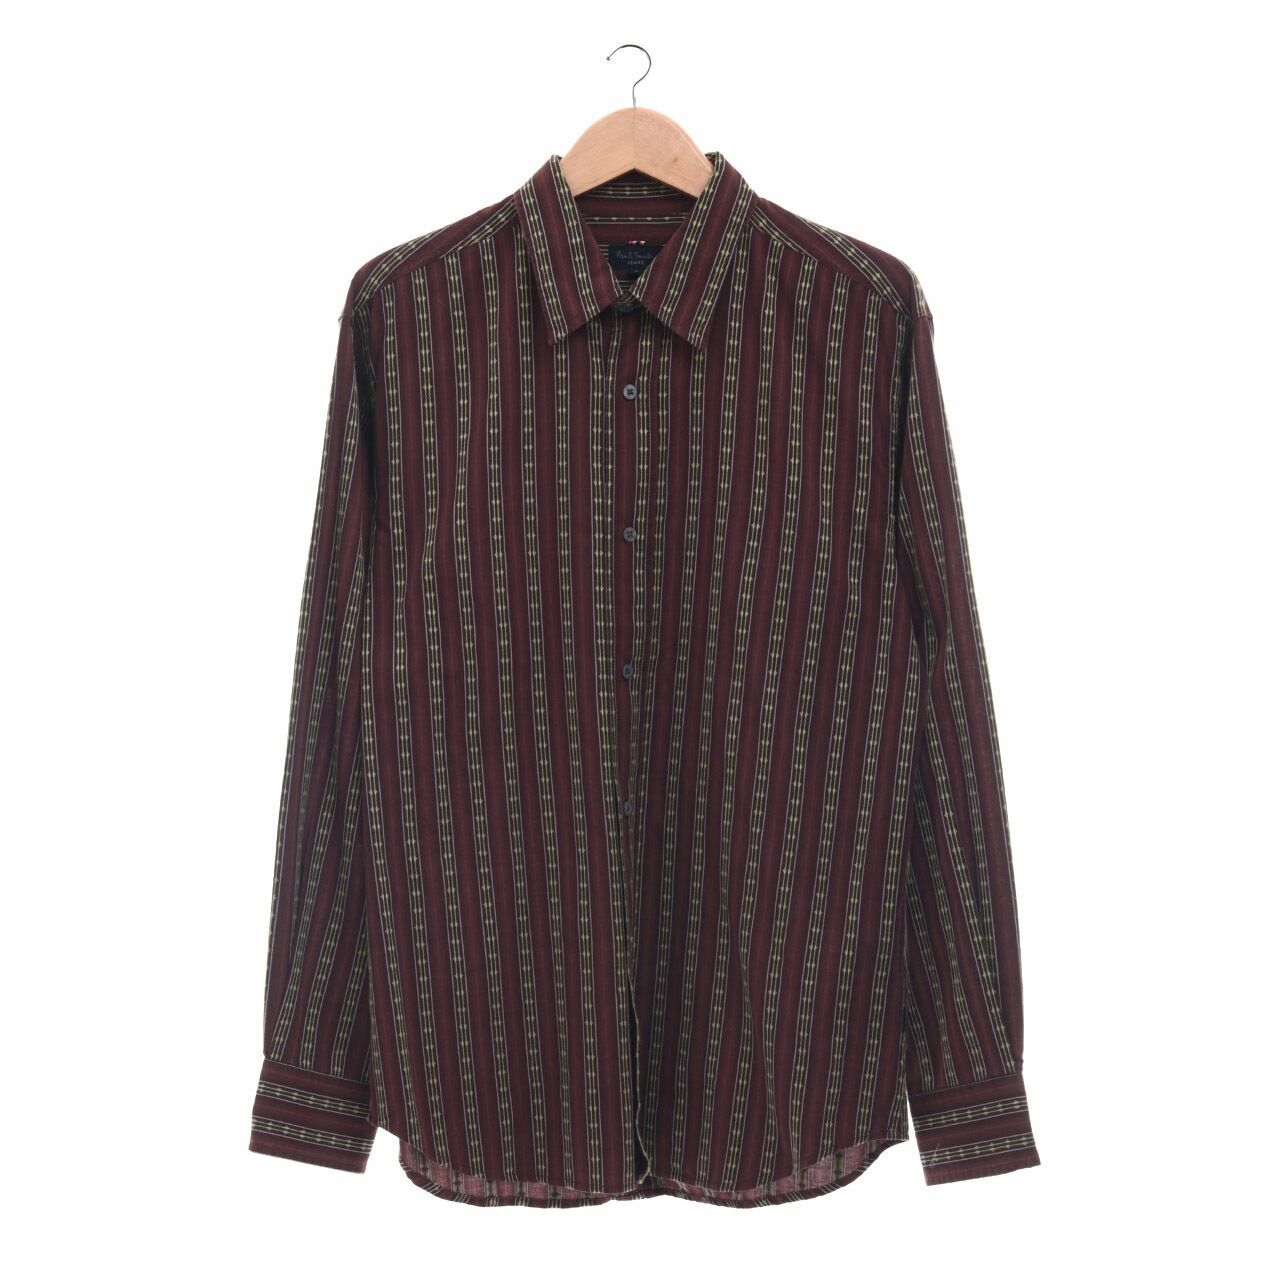 Paul Smith Brown Patterned Shirt